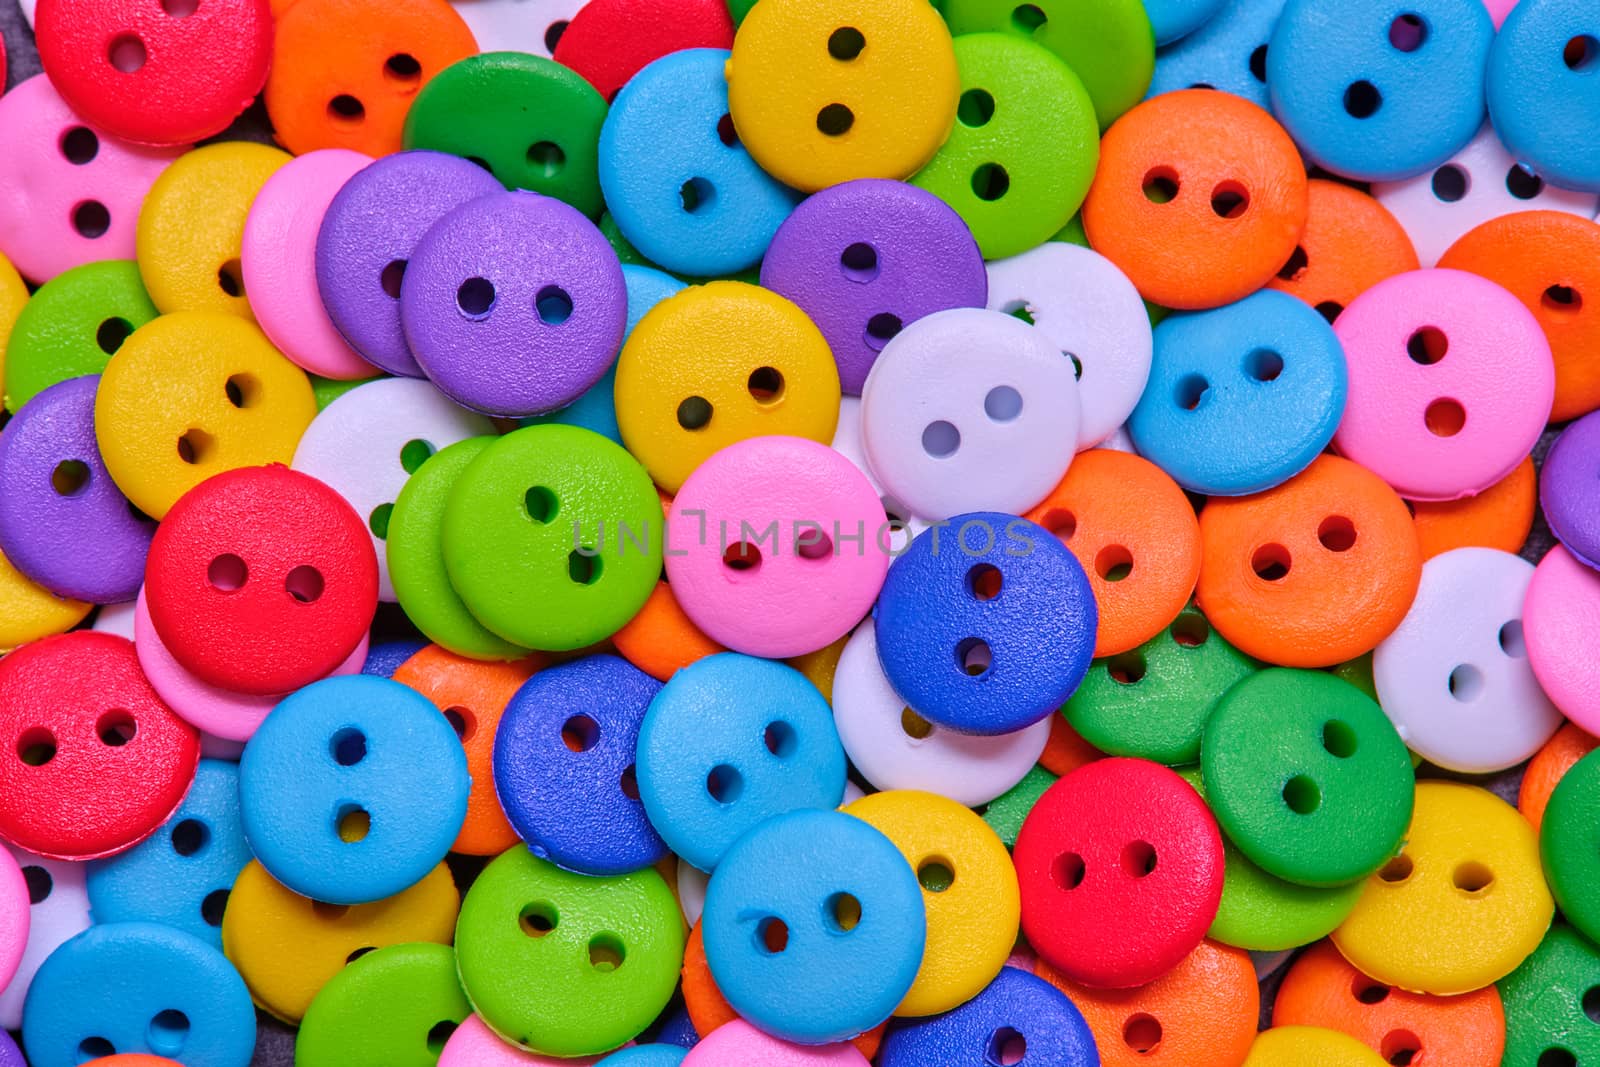 Various sewing Colorful plastic buttons as background by Fischeron